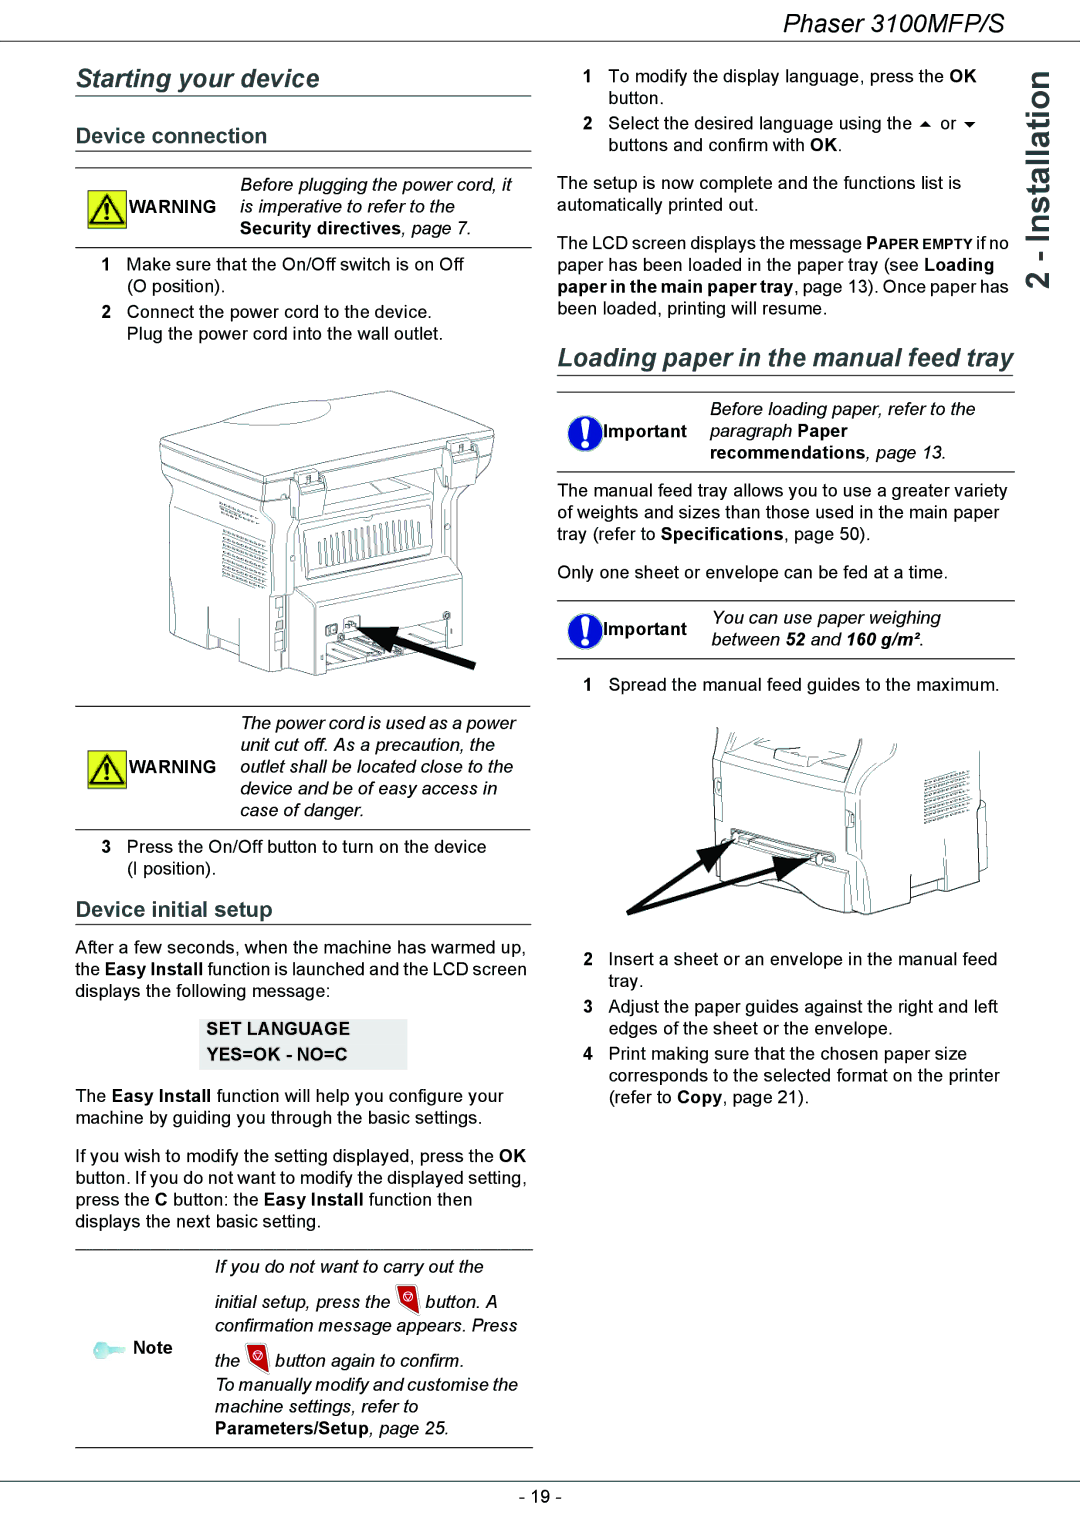 Xerox 3100MFP/S Starting your device, Loading paper in the manual feed tray, Device connection, Device initial setup 